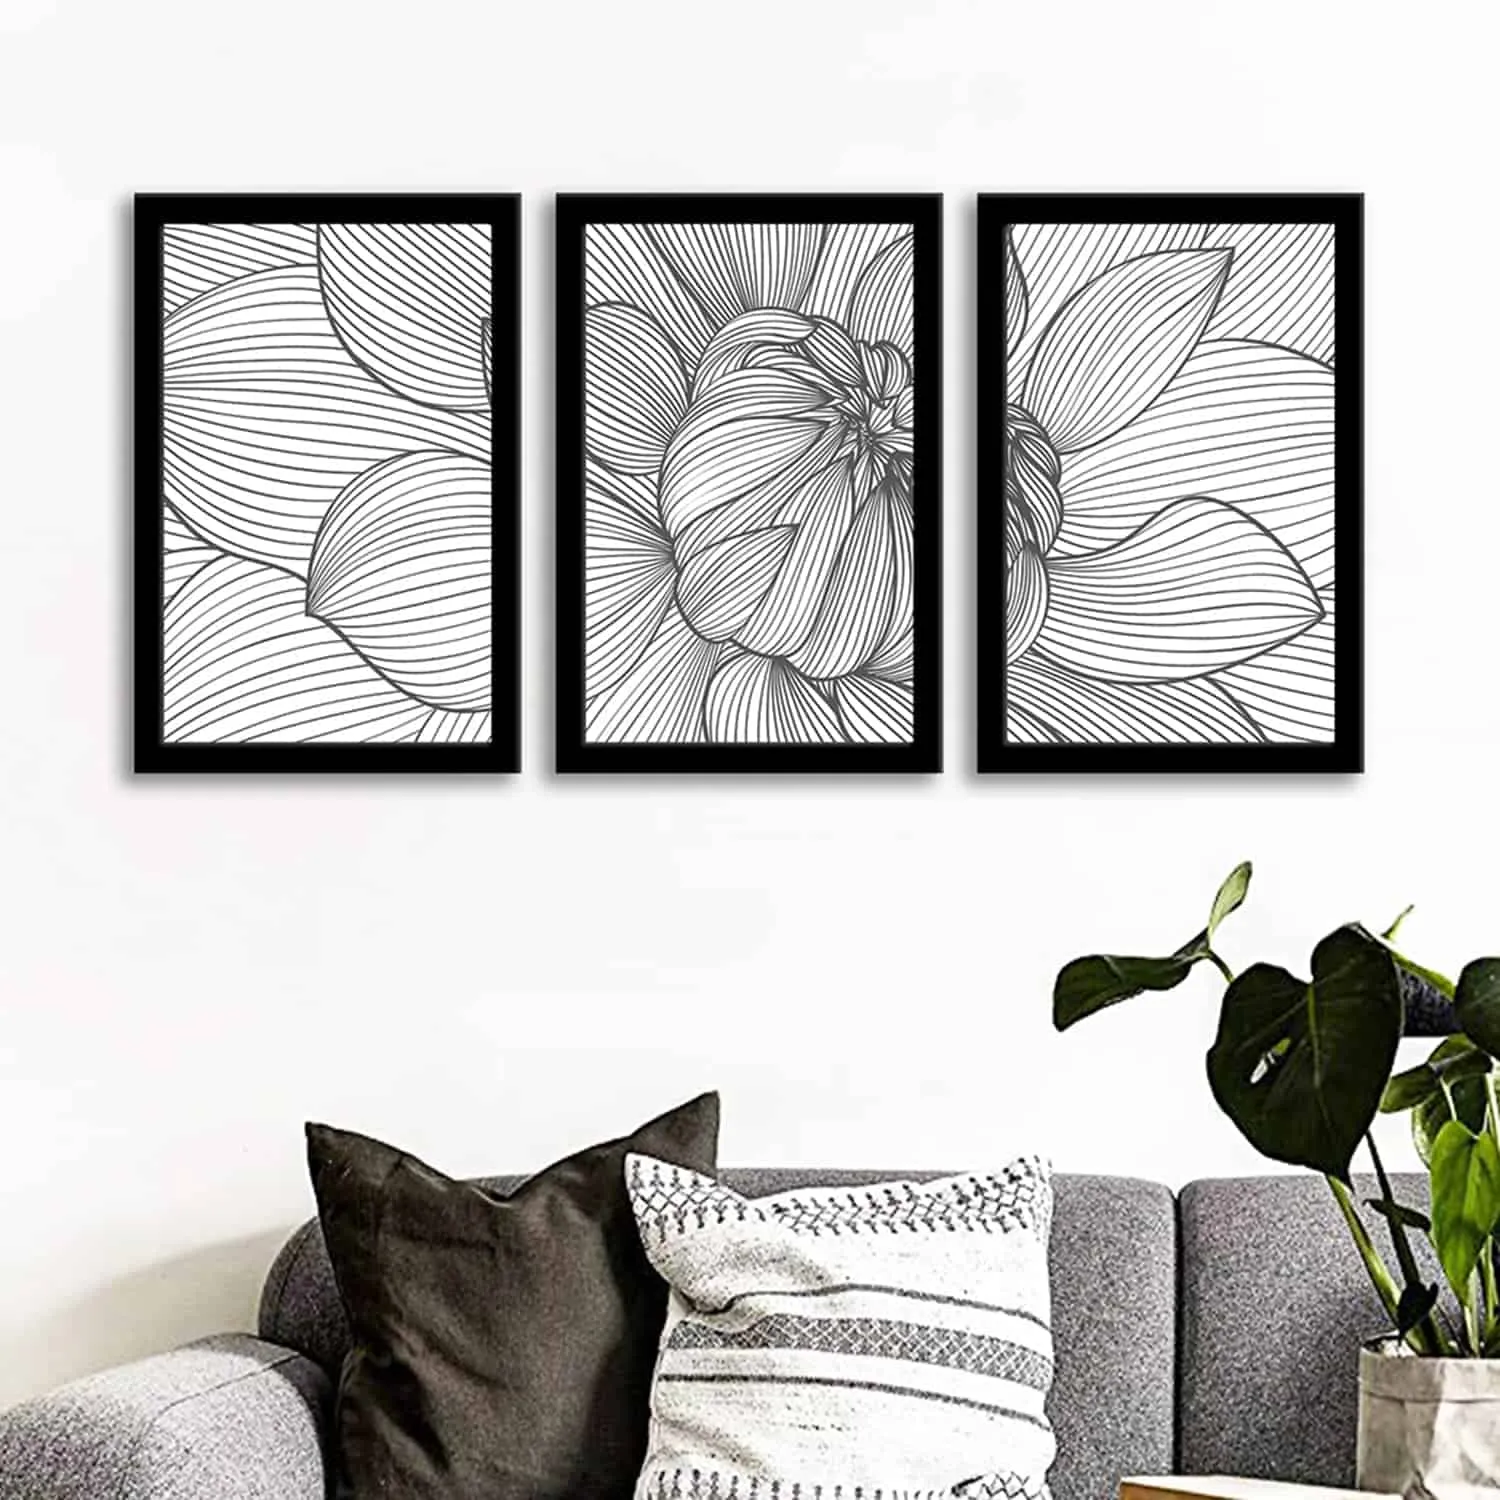 A monochromatic artwork hanged in a living room.